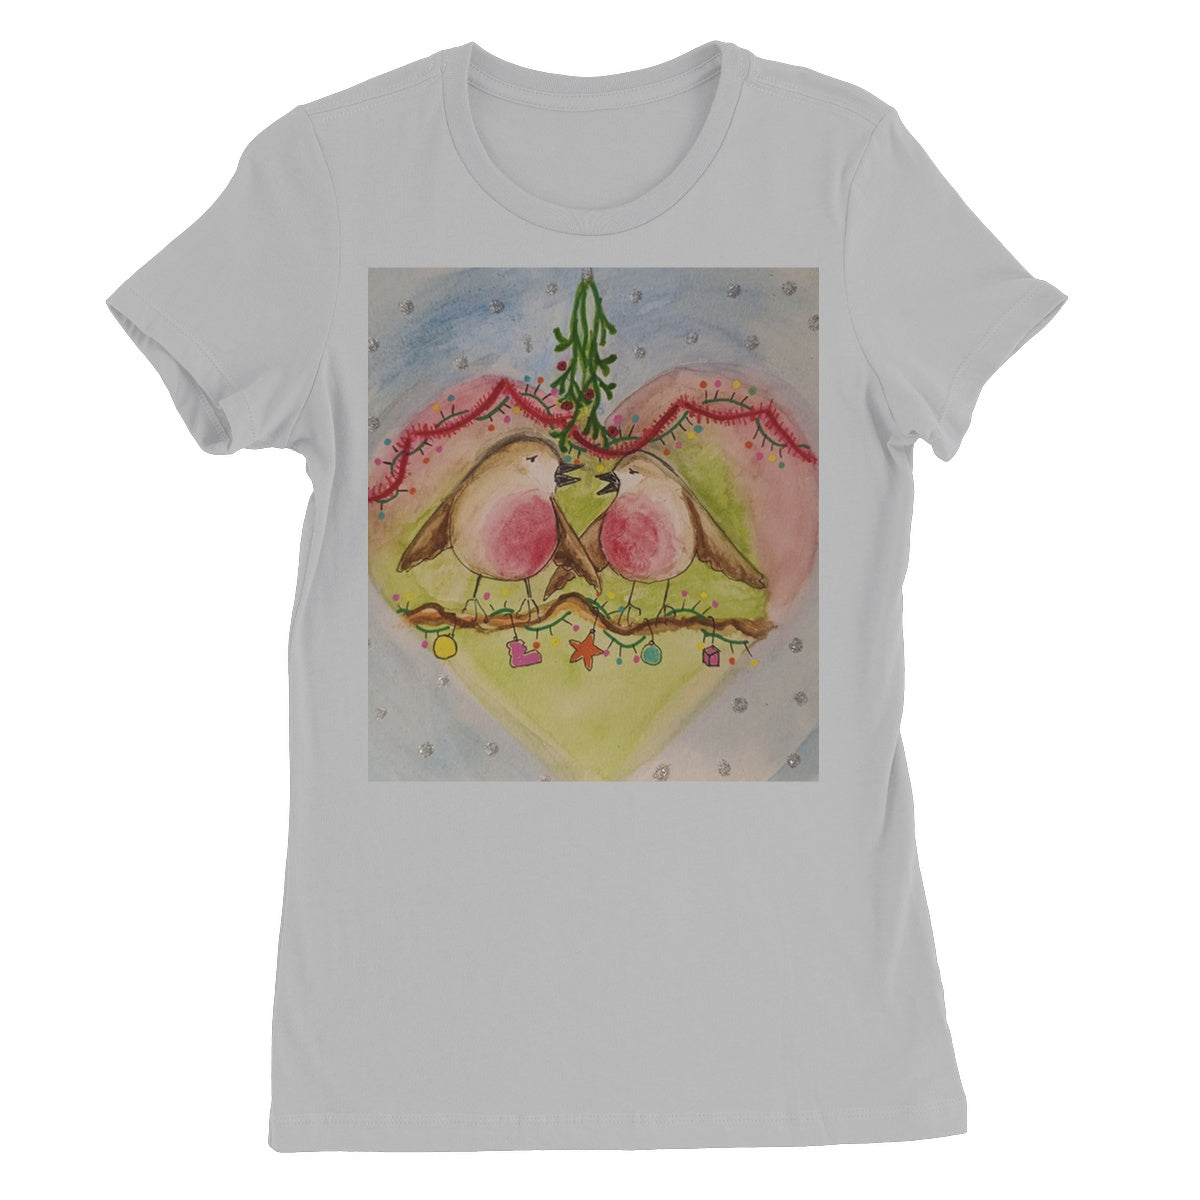 Love Is In The Air Women's Favourite T-Shirt